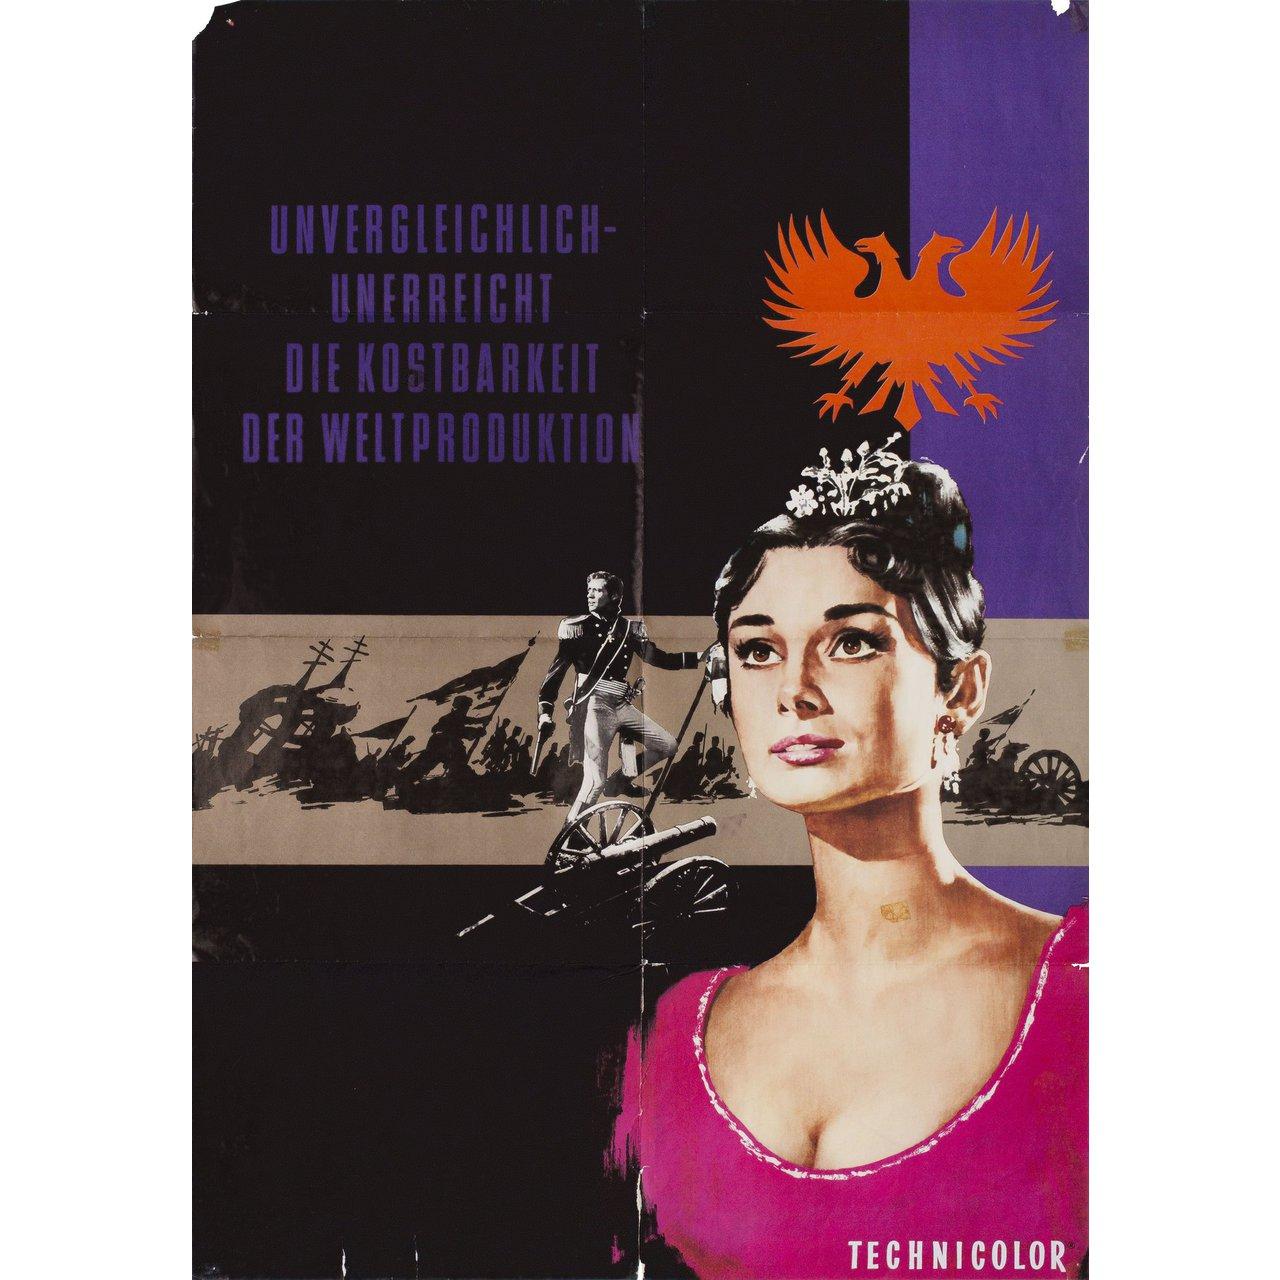 Original 1960s re-release German A1 poster by Lutz Peltzer for the 1956 film “War and Peace” directed by King Vidor with Audrey Hepburn / Henry Fonda / Mel Ferrer / Vittorio Gassman. Good very good condition, folded with fold separation. Many